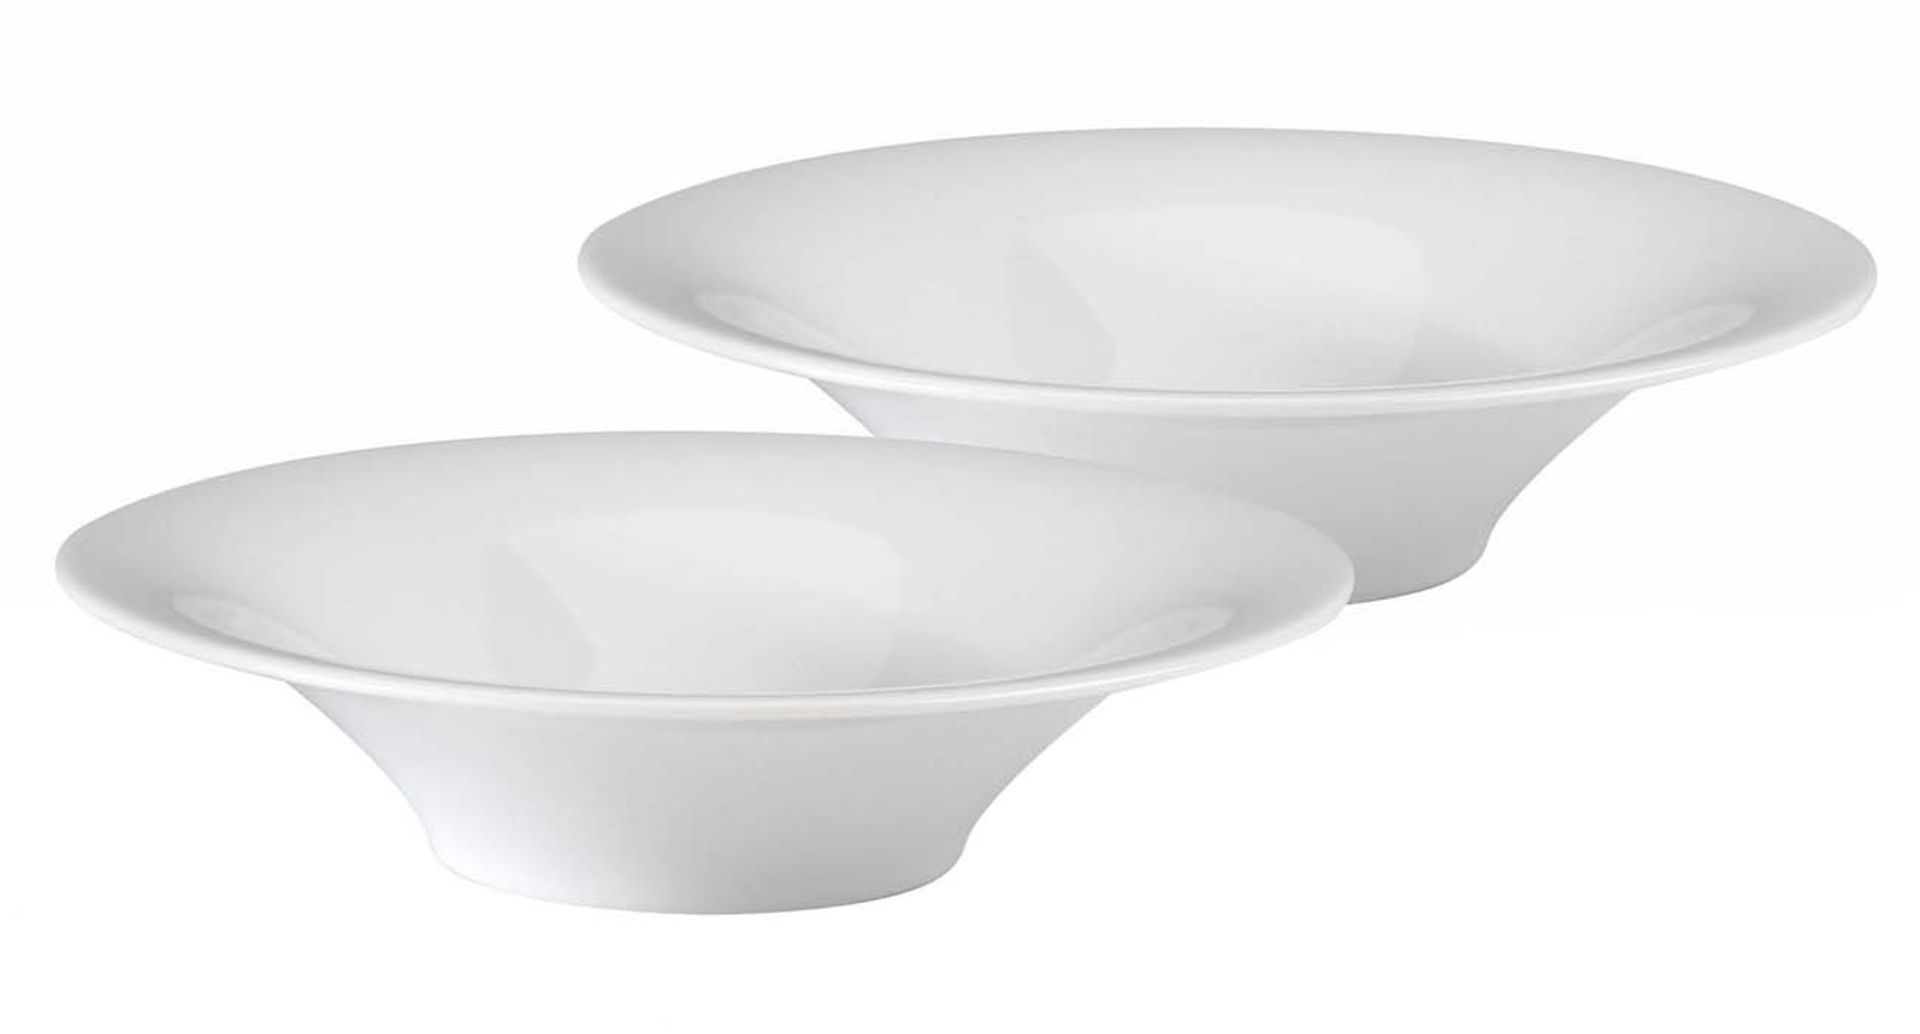 V *TRADE QTY* Brand New Alessi Ku Set of Two 21.9cm Bowls (£39.99 MAHAHome) X 70 YOUR BID PRICE TO